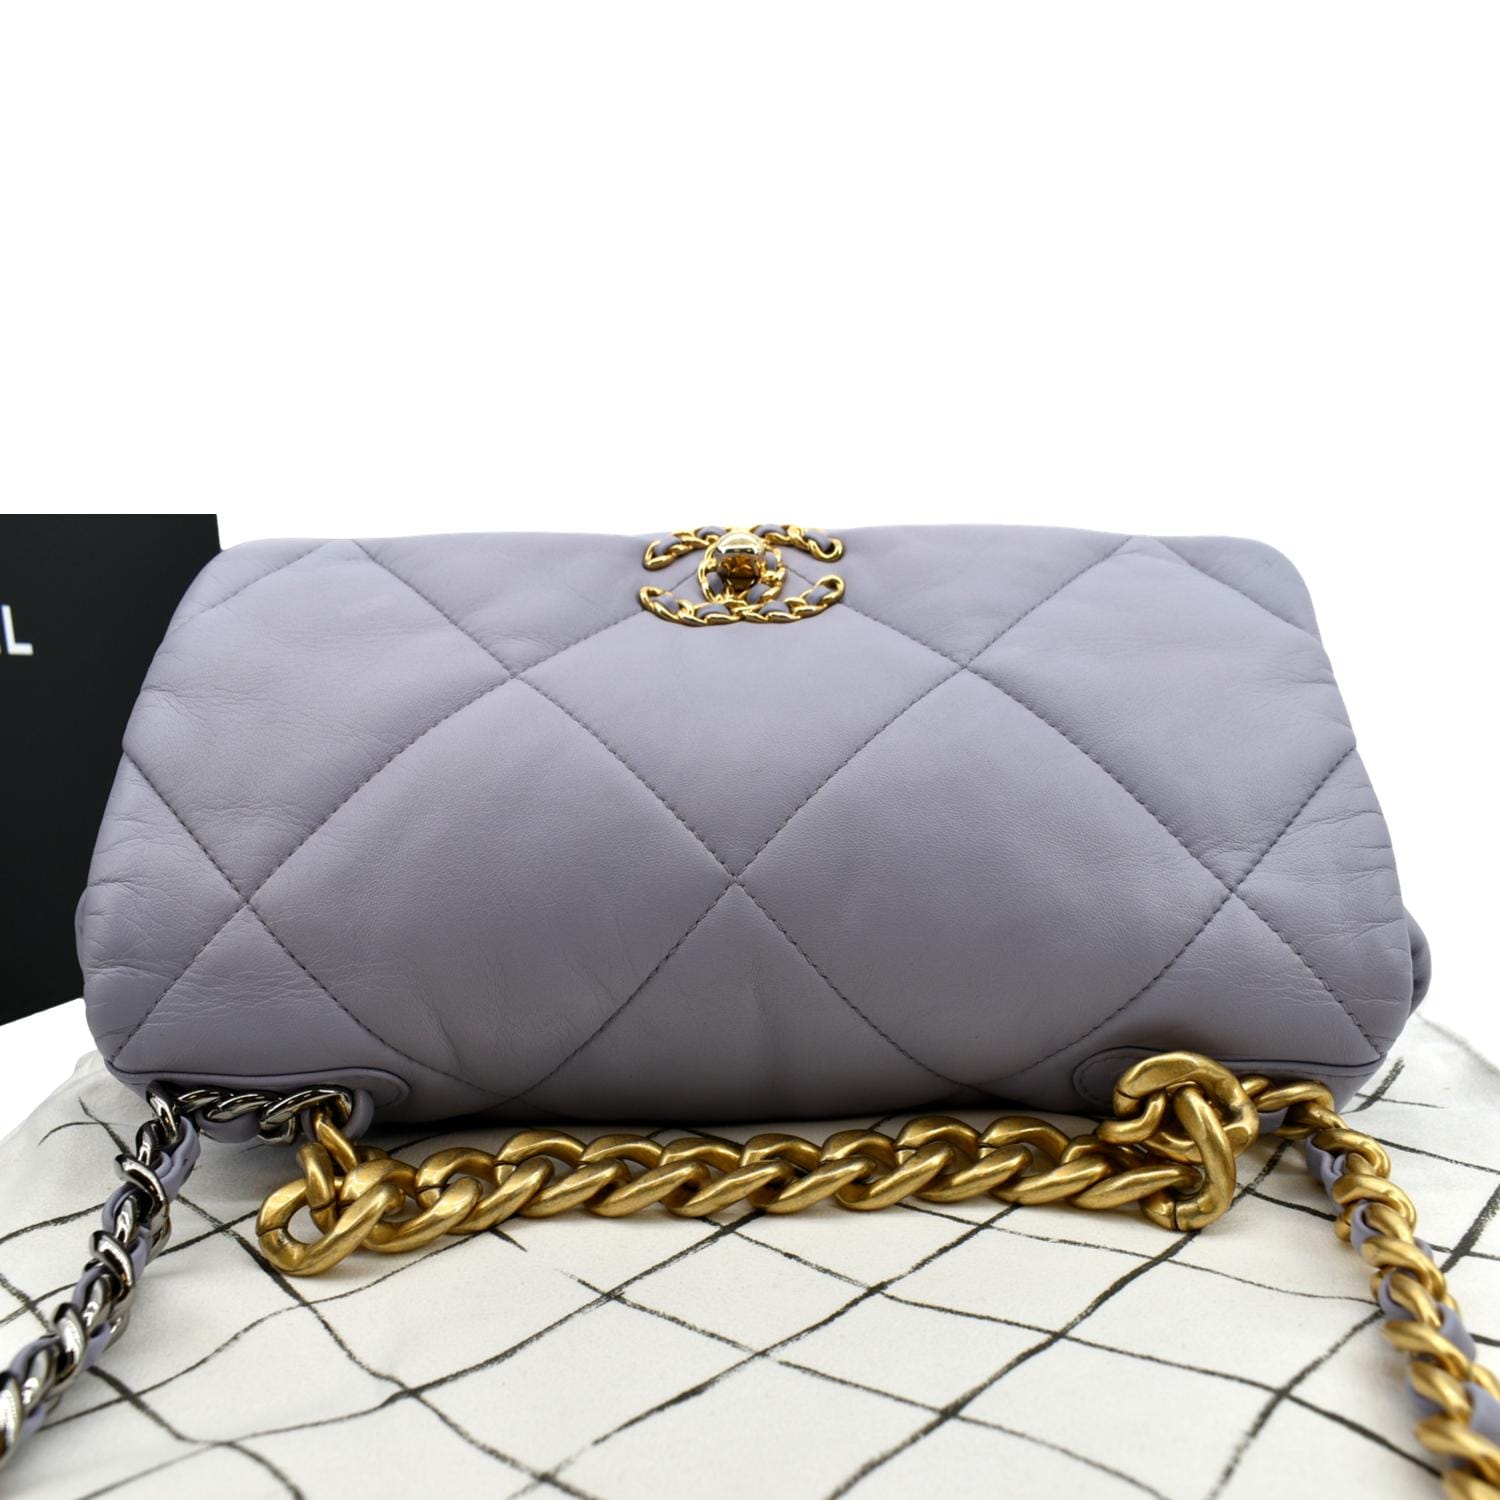 Chanel 19 Flap Bag Quilted Leather Maxi Neutral